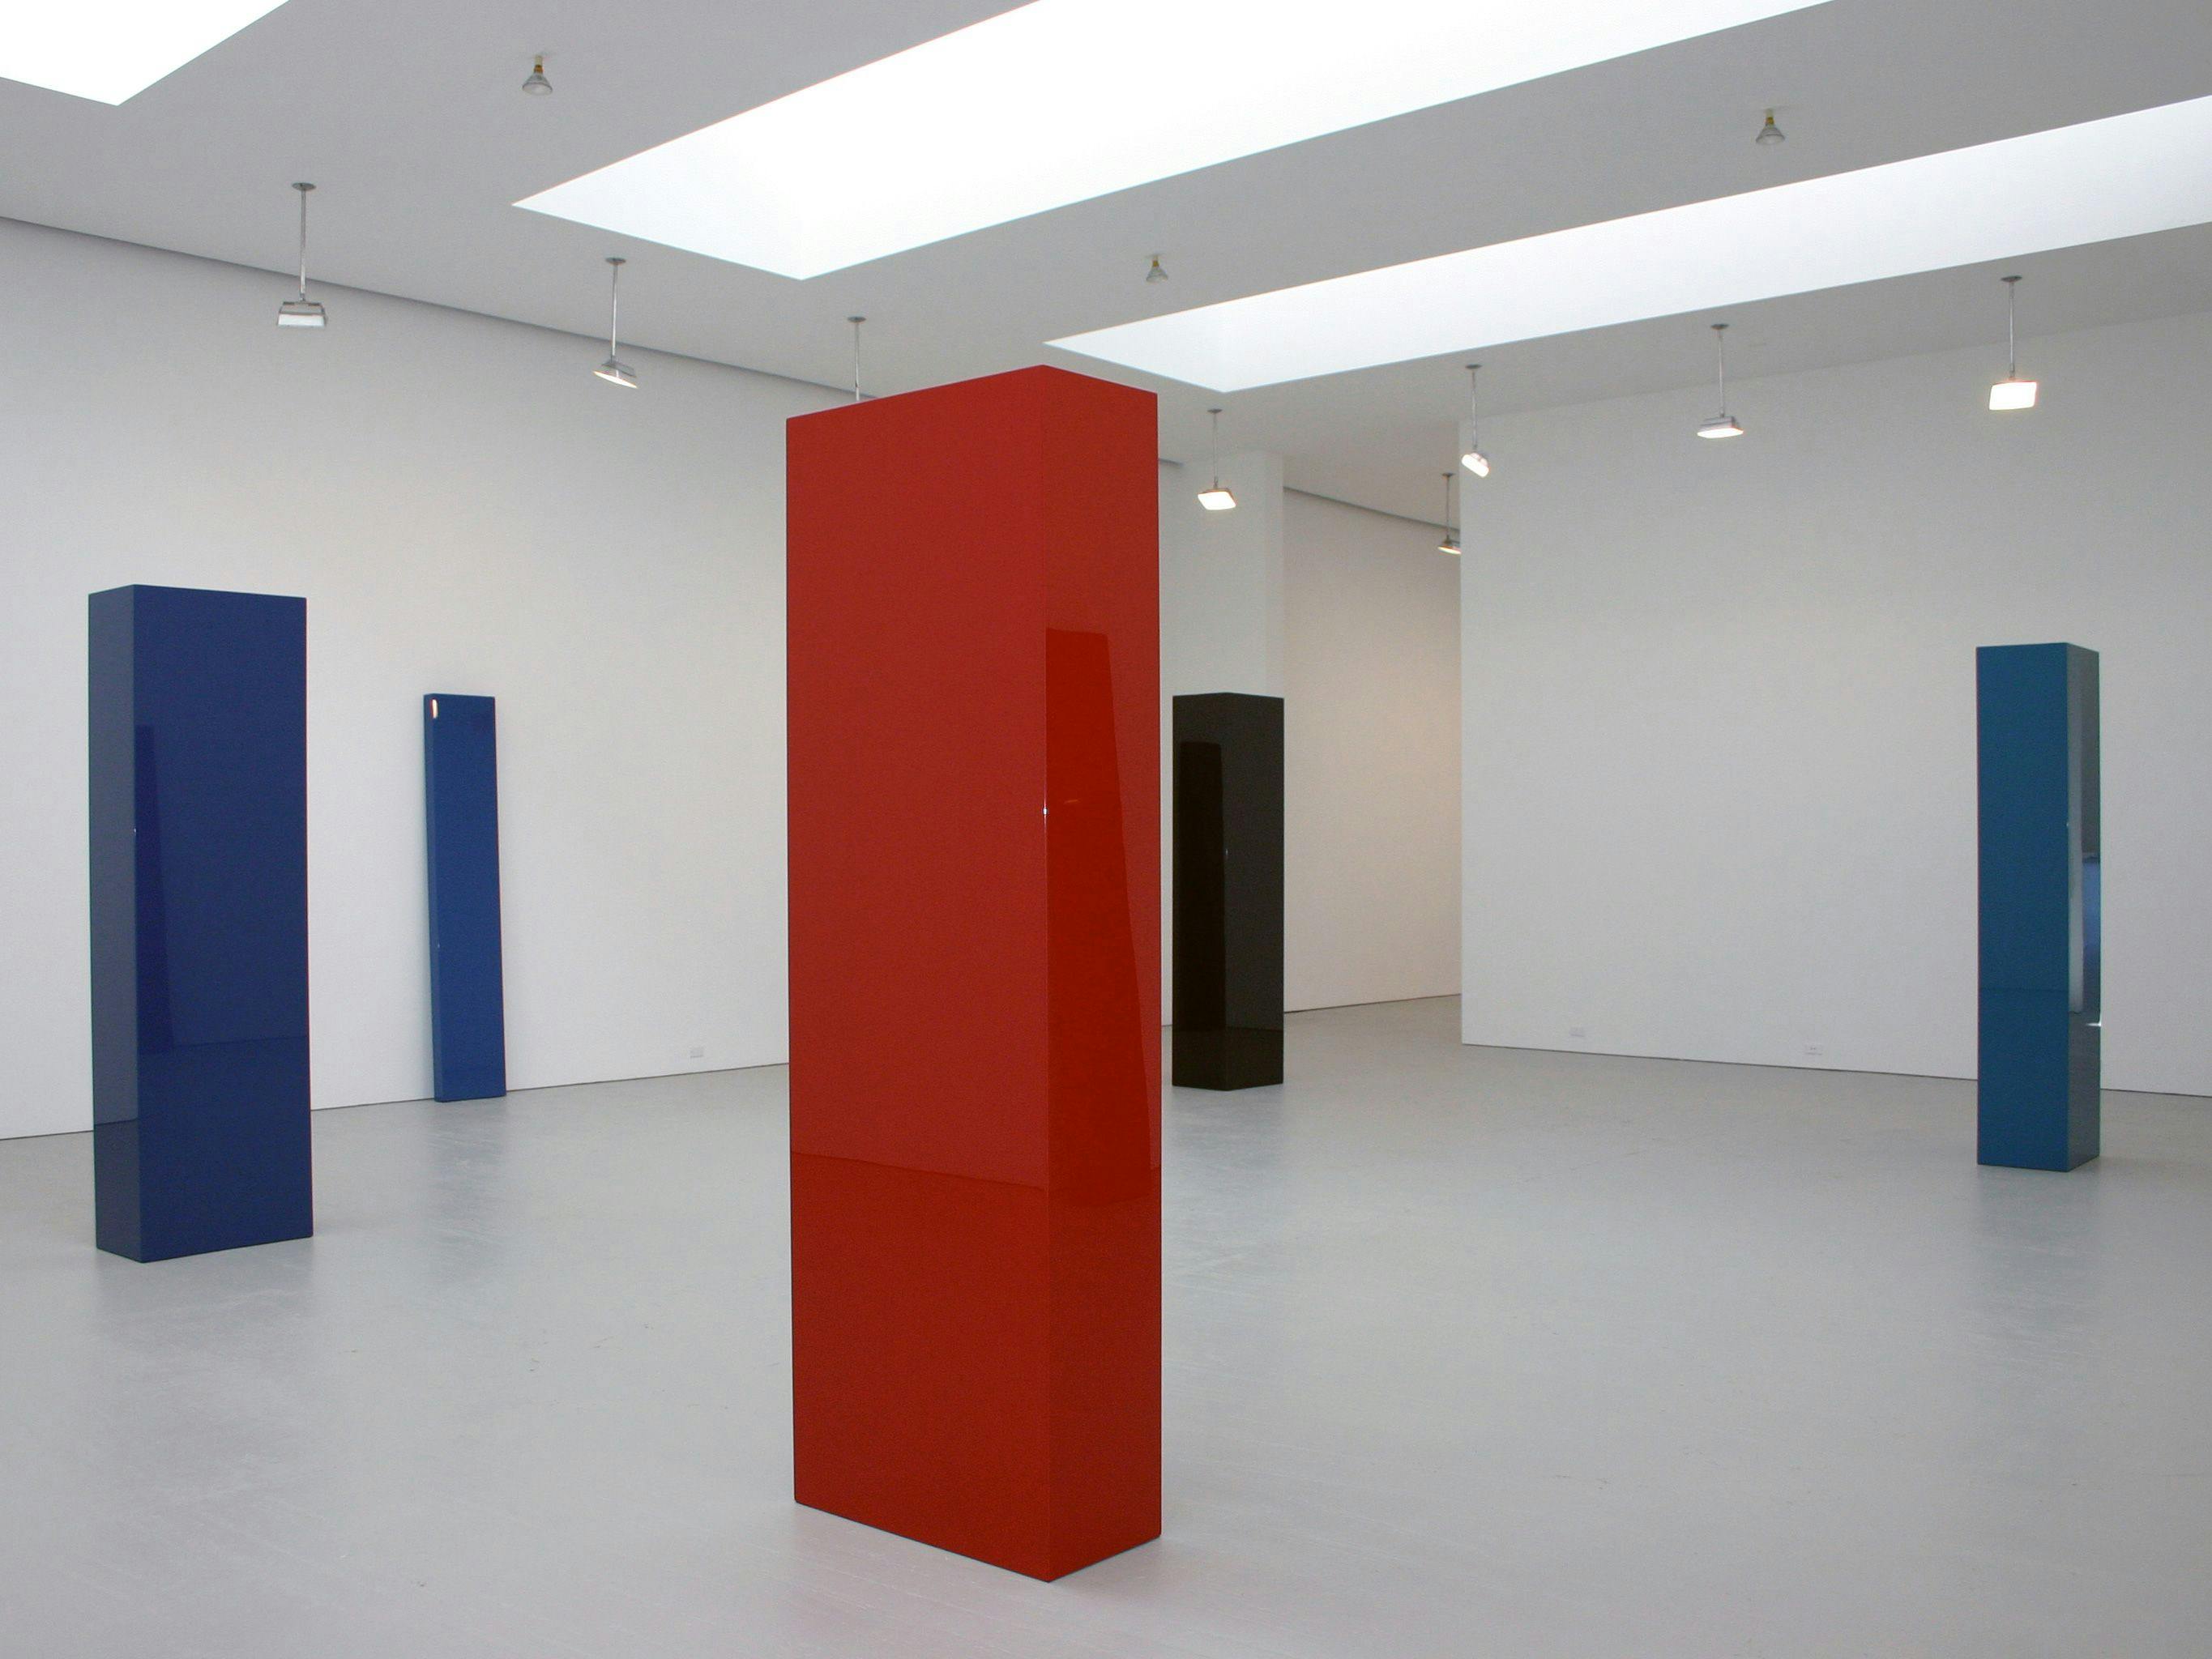 Installation view of the solo exhibition¬†John McCracken: New Sculpture¬†at David Zwirner, New York, dated January 29 through February 28, 2004.